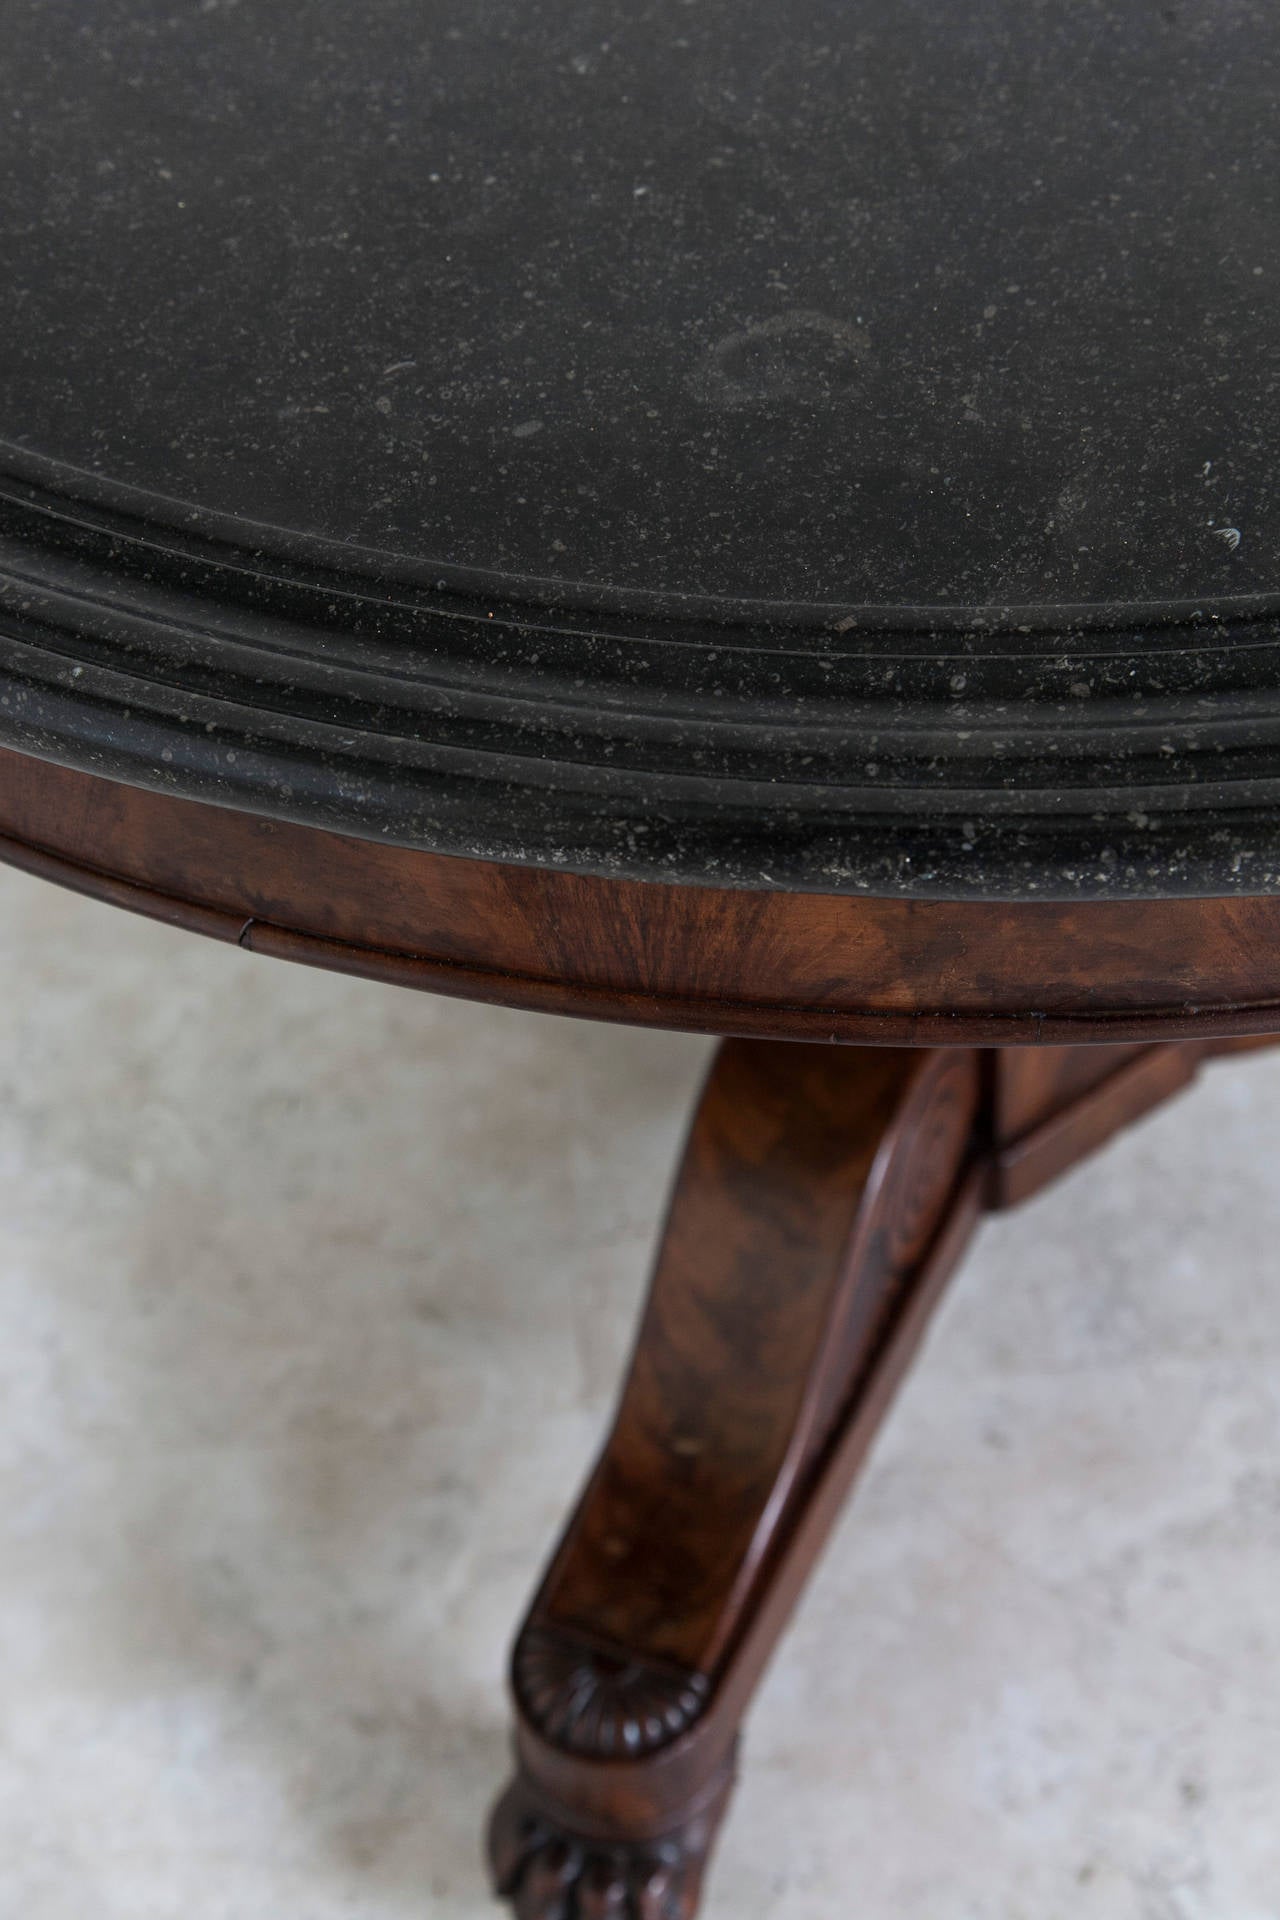 This Restauration period flamed mahogany center table rests on a tripod pedestal with claw's feet and casters. Its top is made of exceptional multibeveled Belgian black marble. This circa 1815 piece is of an ideal size as either a foyer table or to